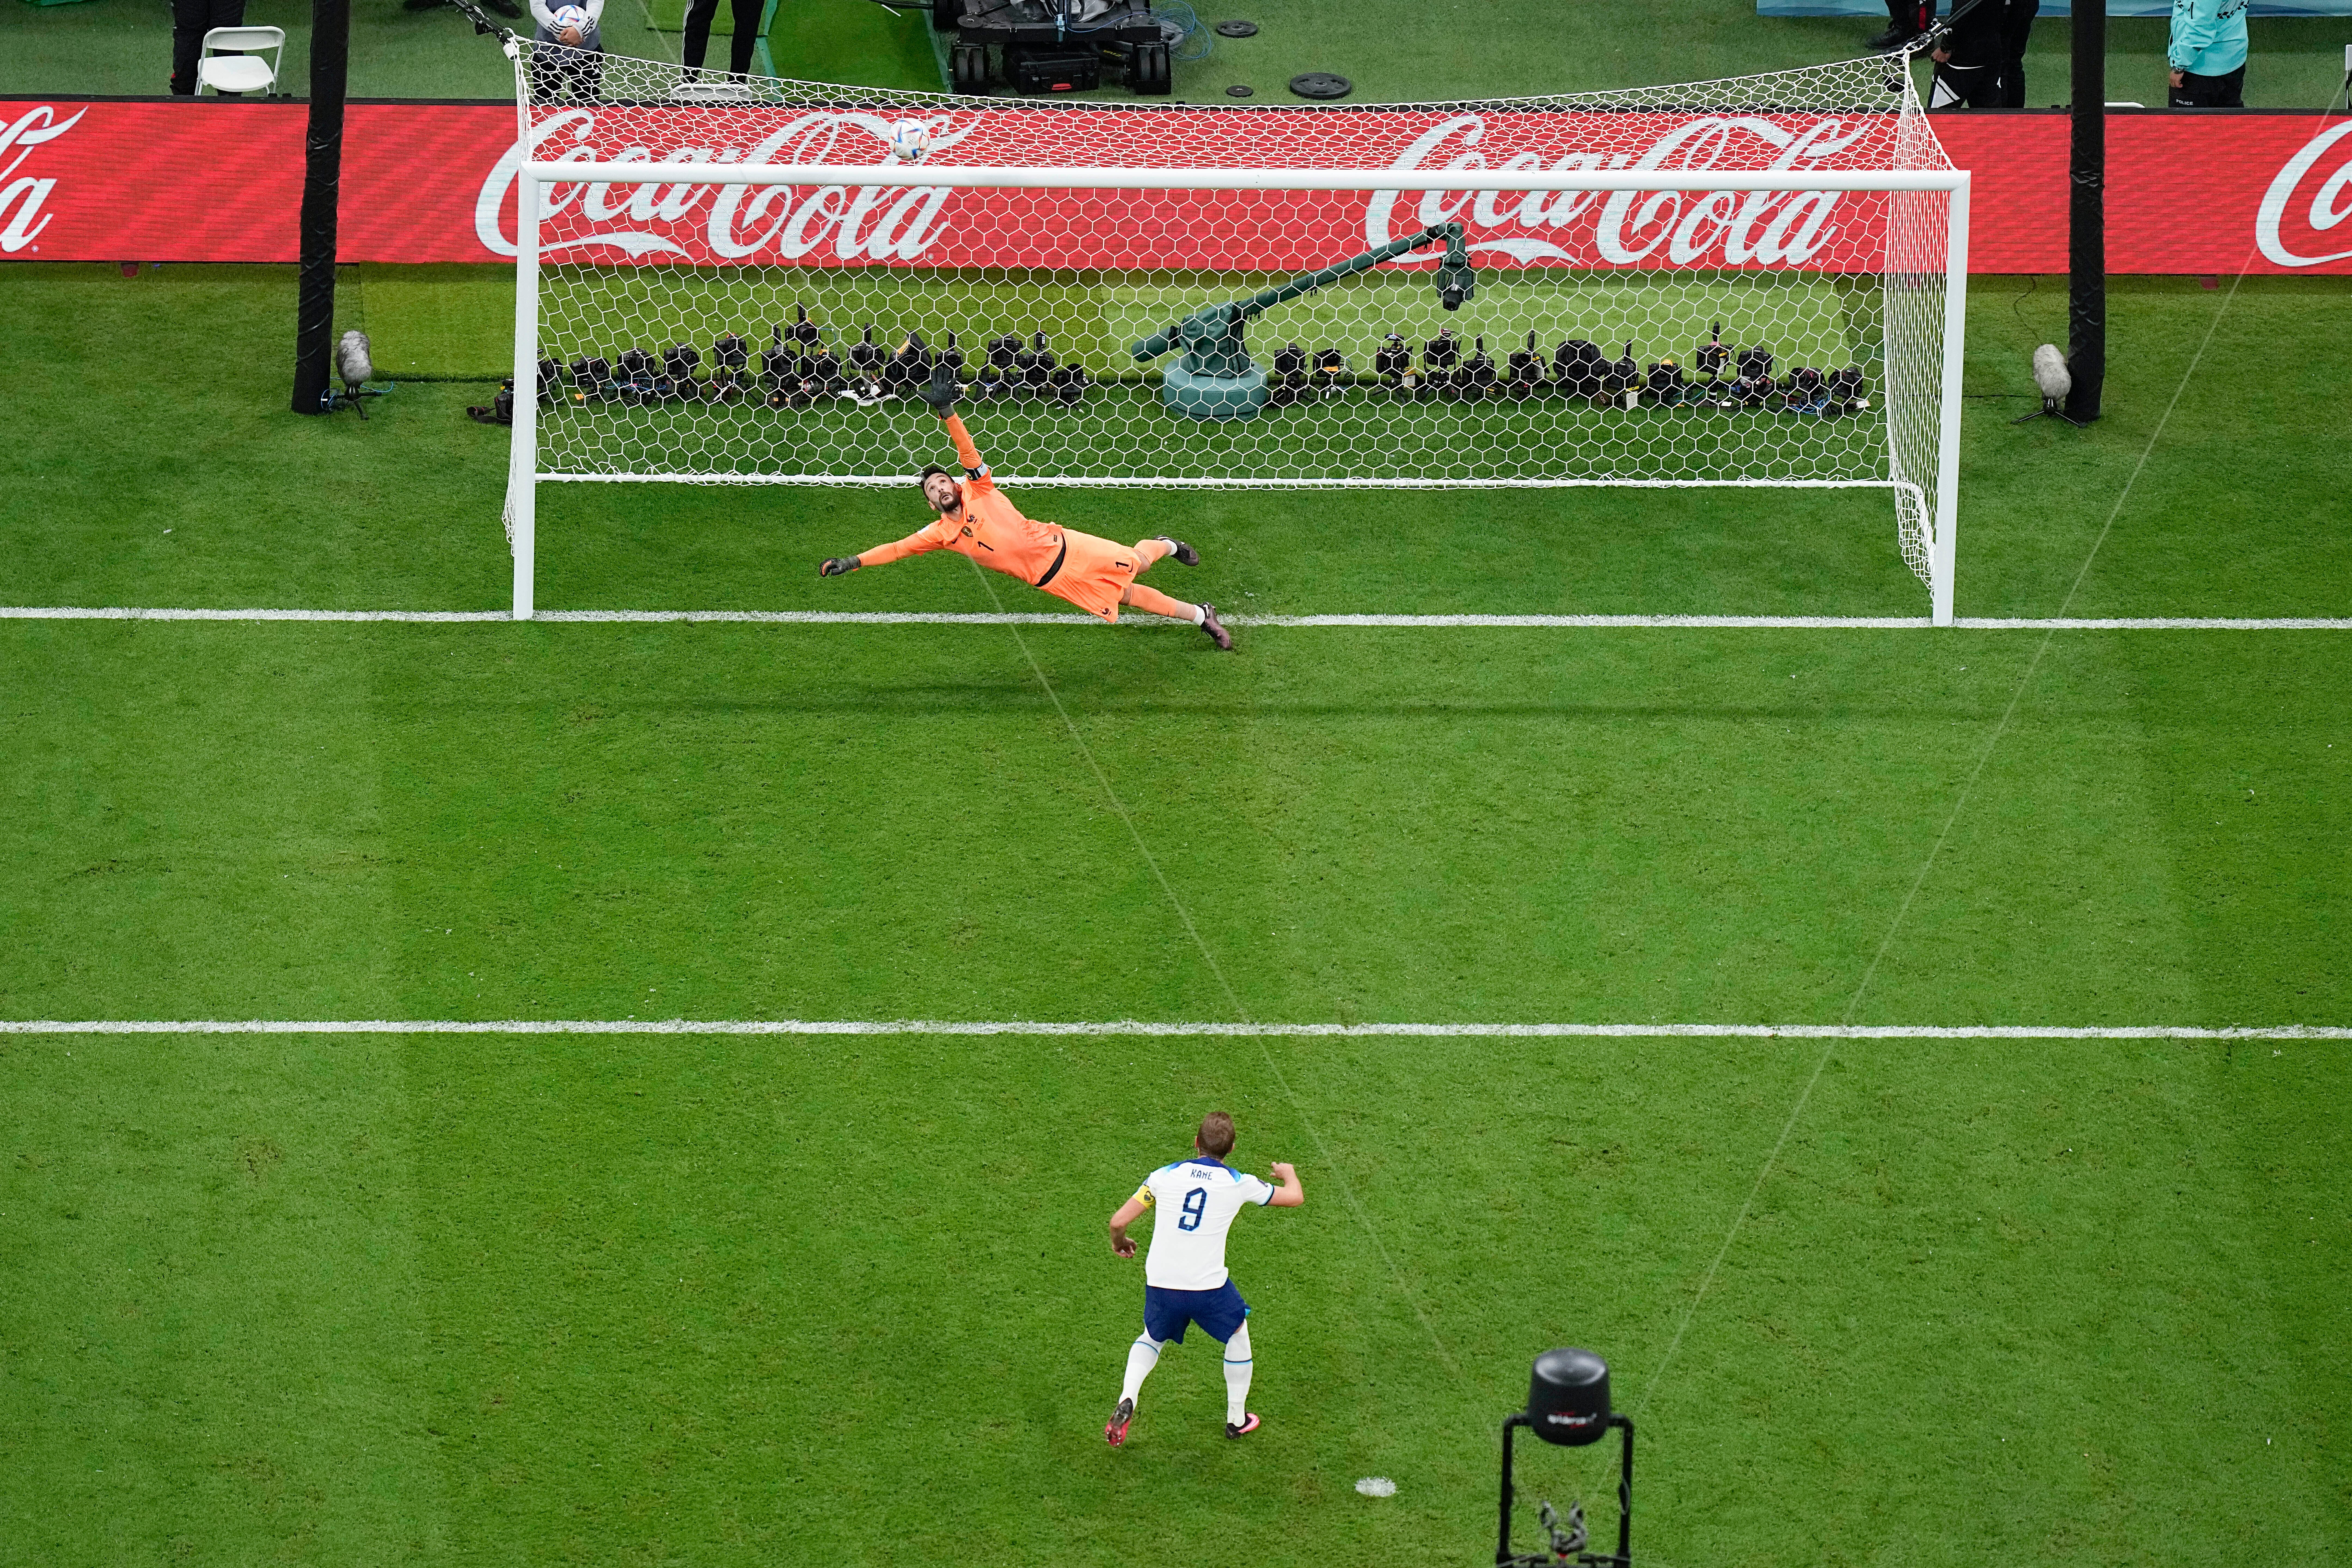 Kane’s penalty miss proved fatal to England’s hopes